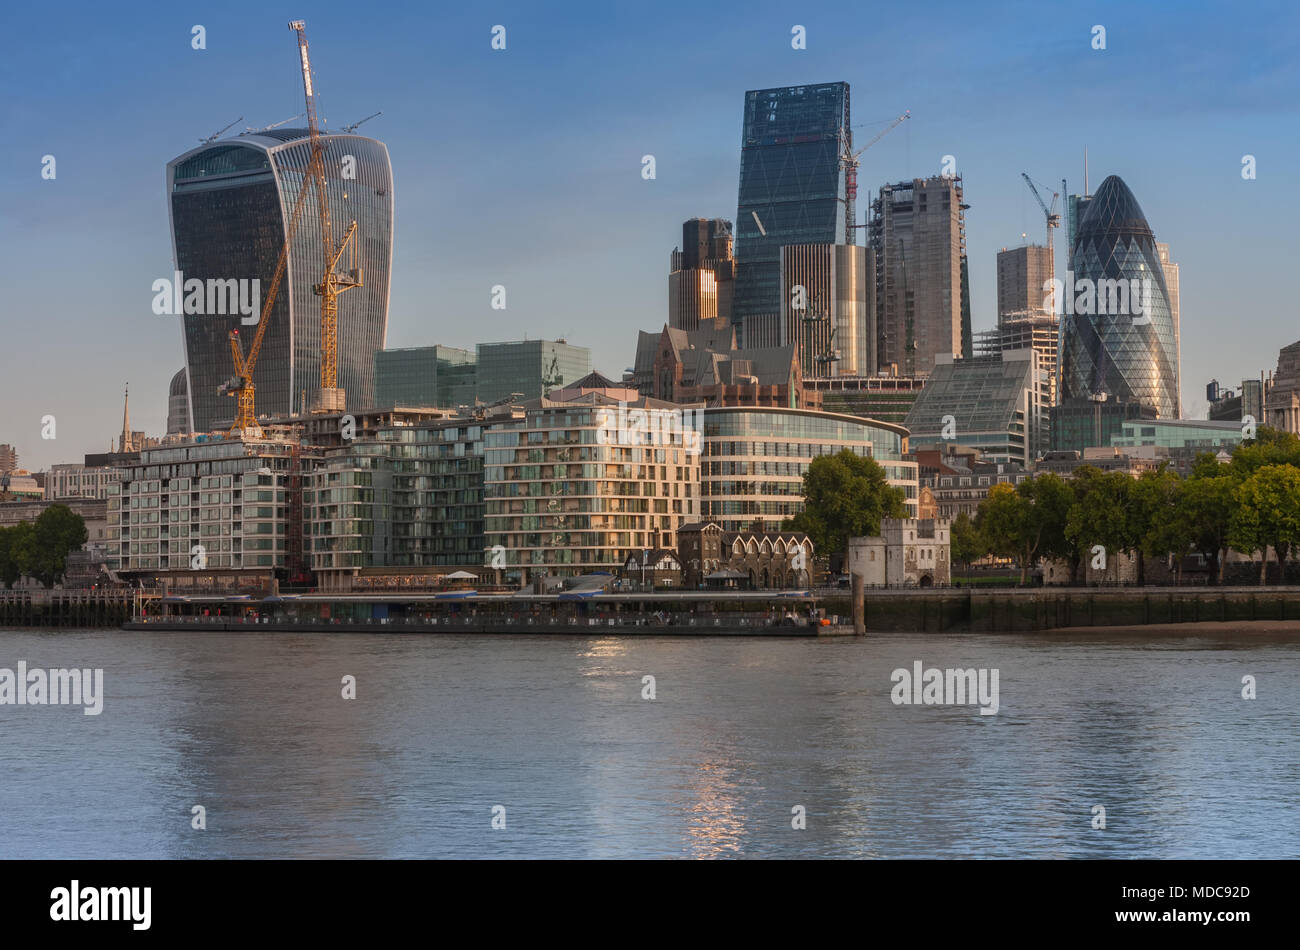 Thames embankment and london skyscrapers in City of London in the ...